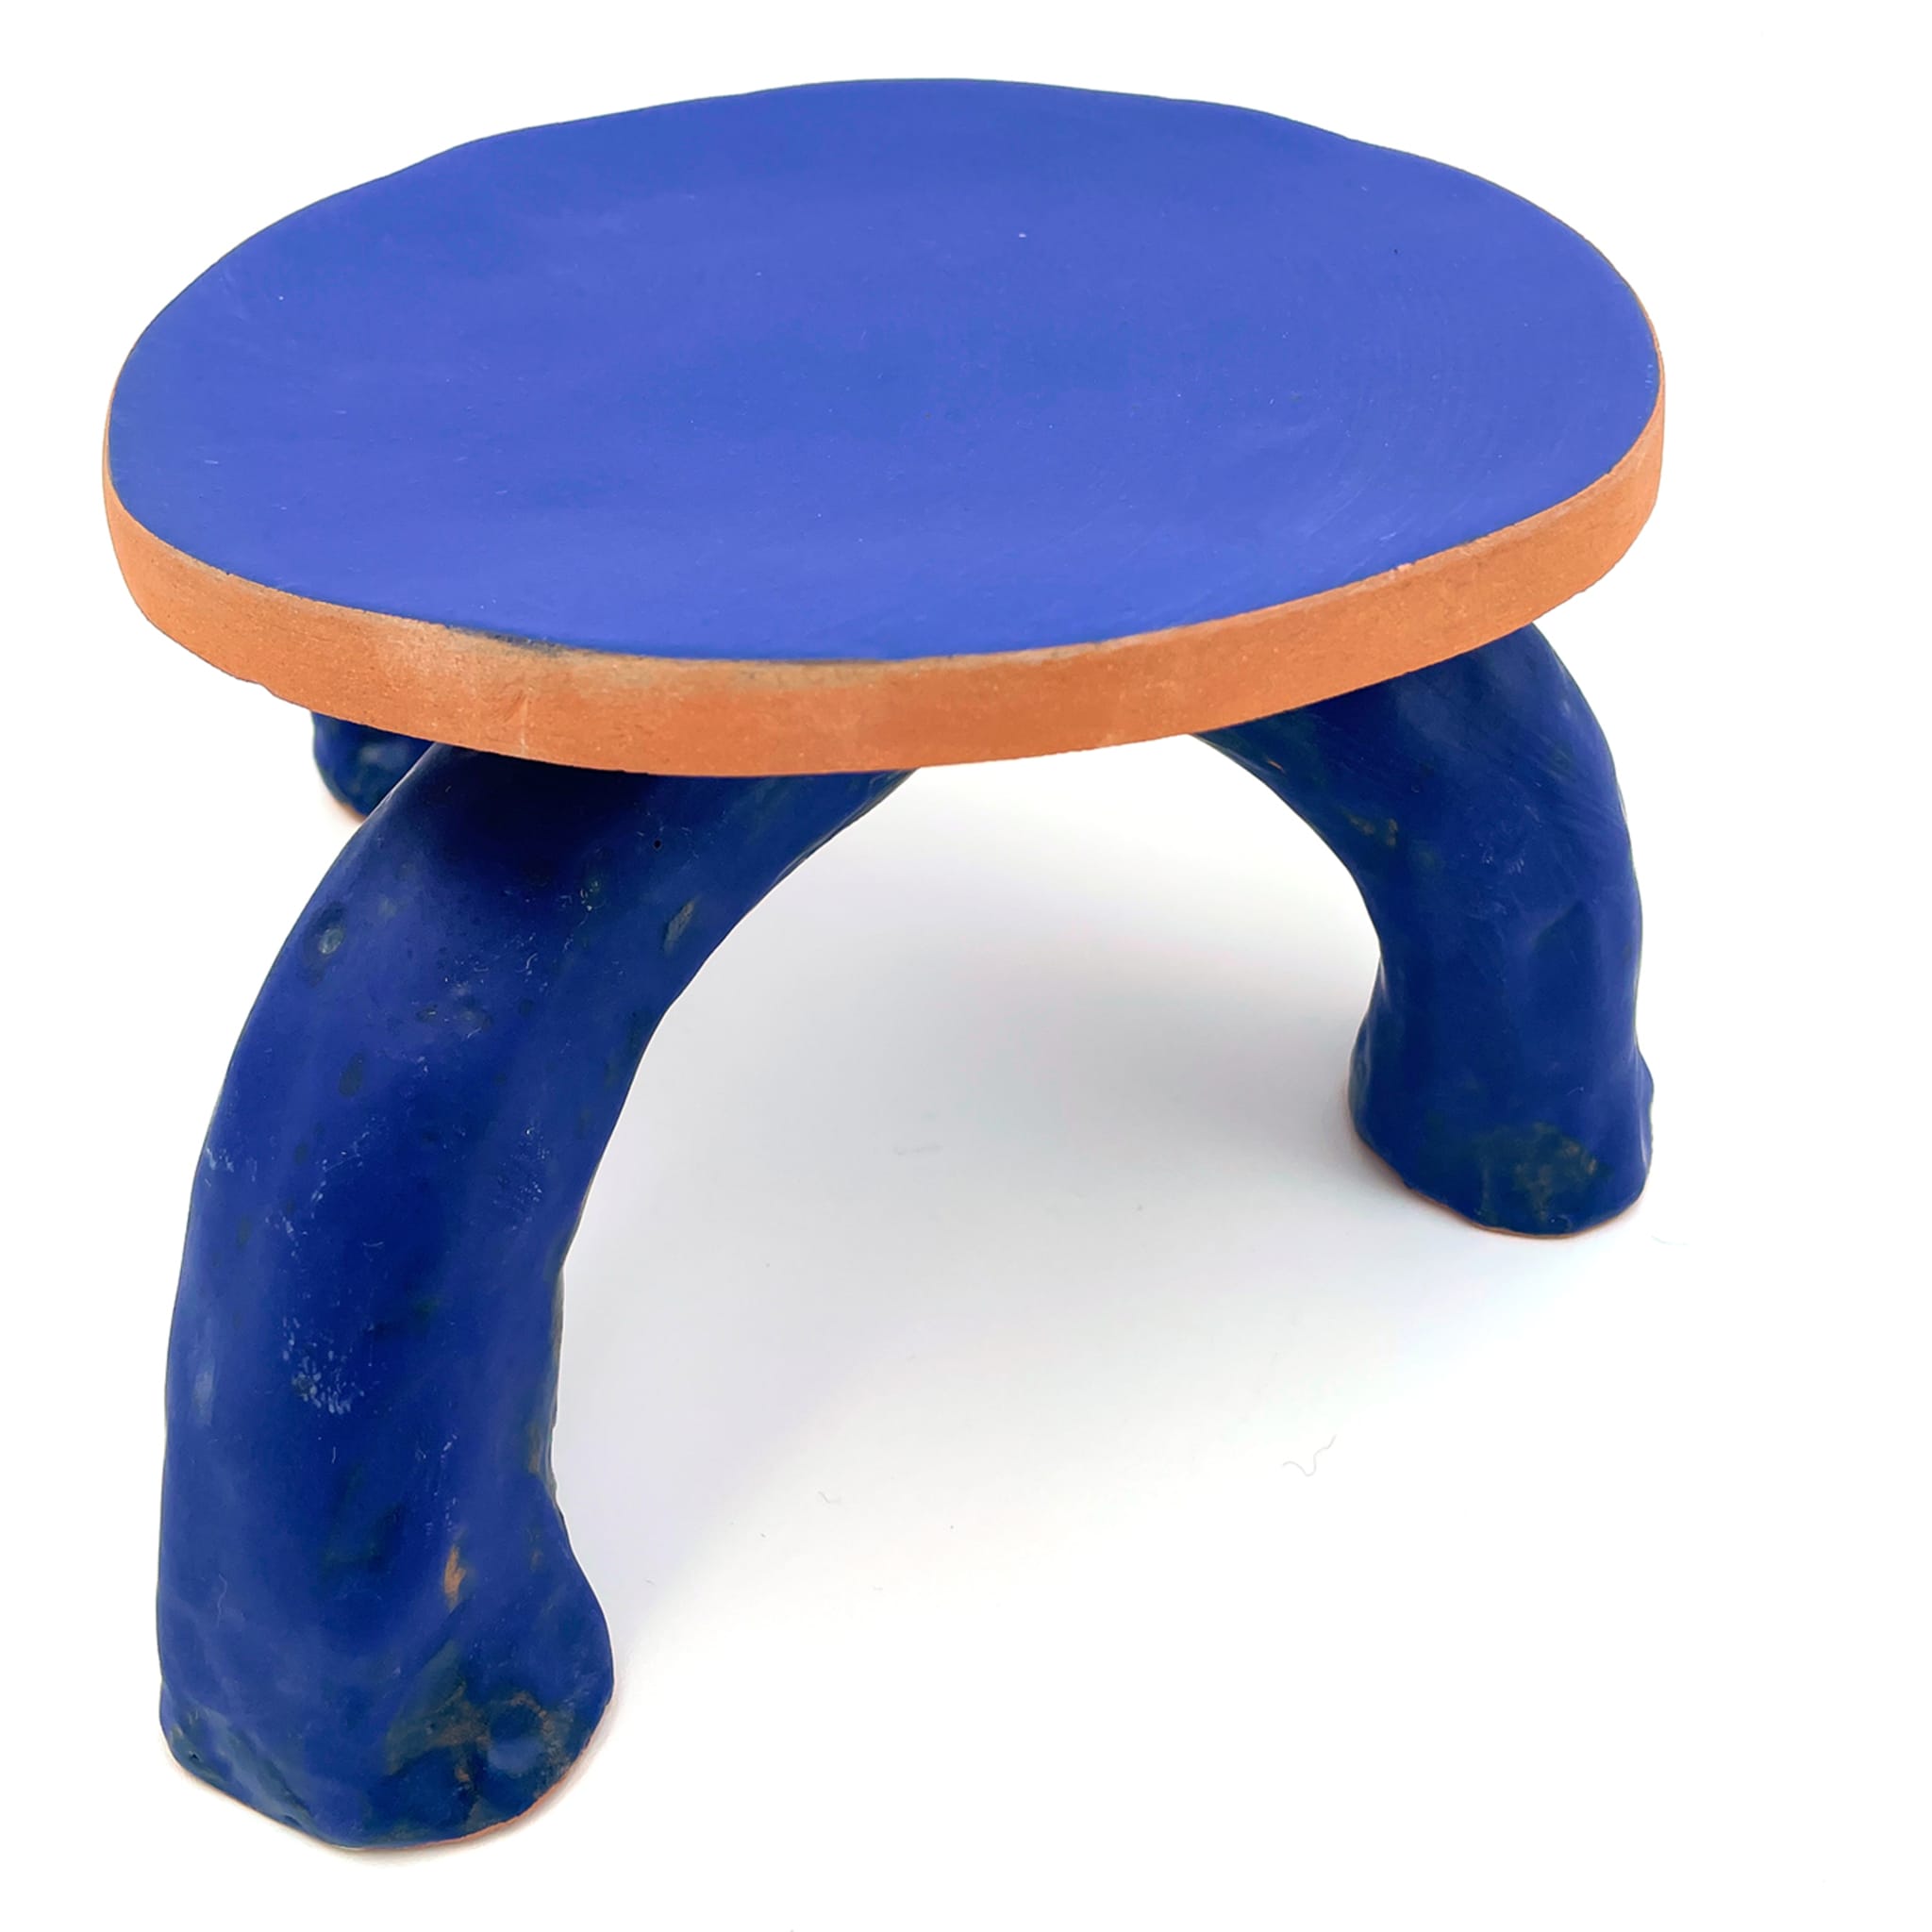 Fungo 3-legged Egyptian Blue and Matte Blue Cake Stand - Alternative view 5